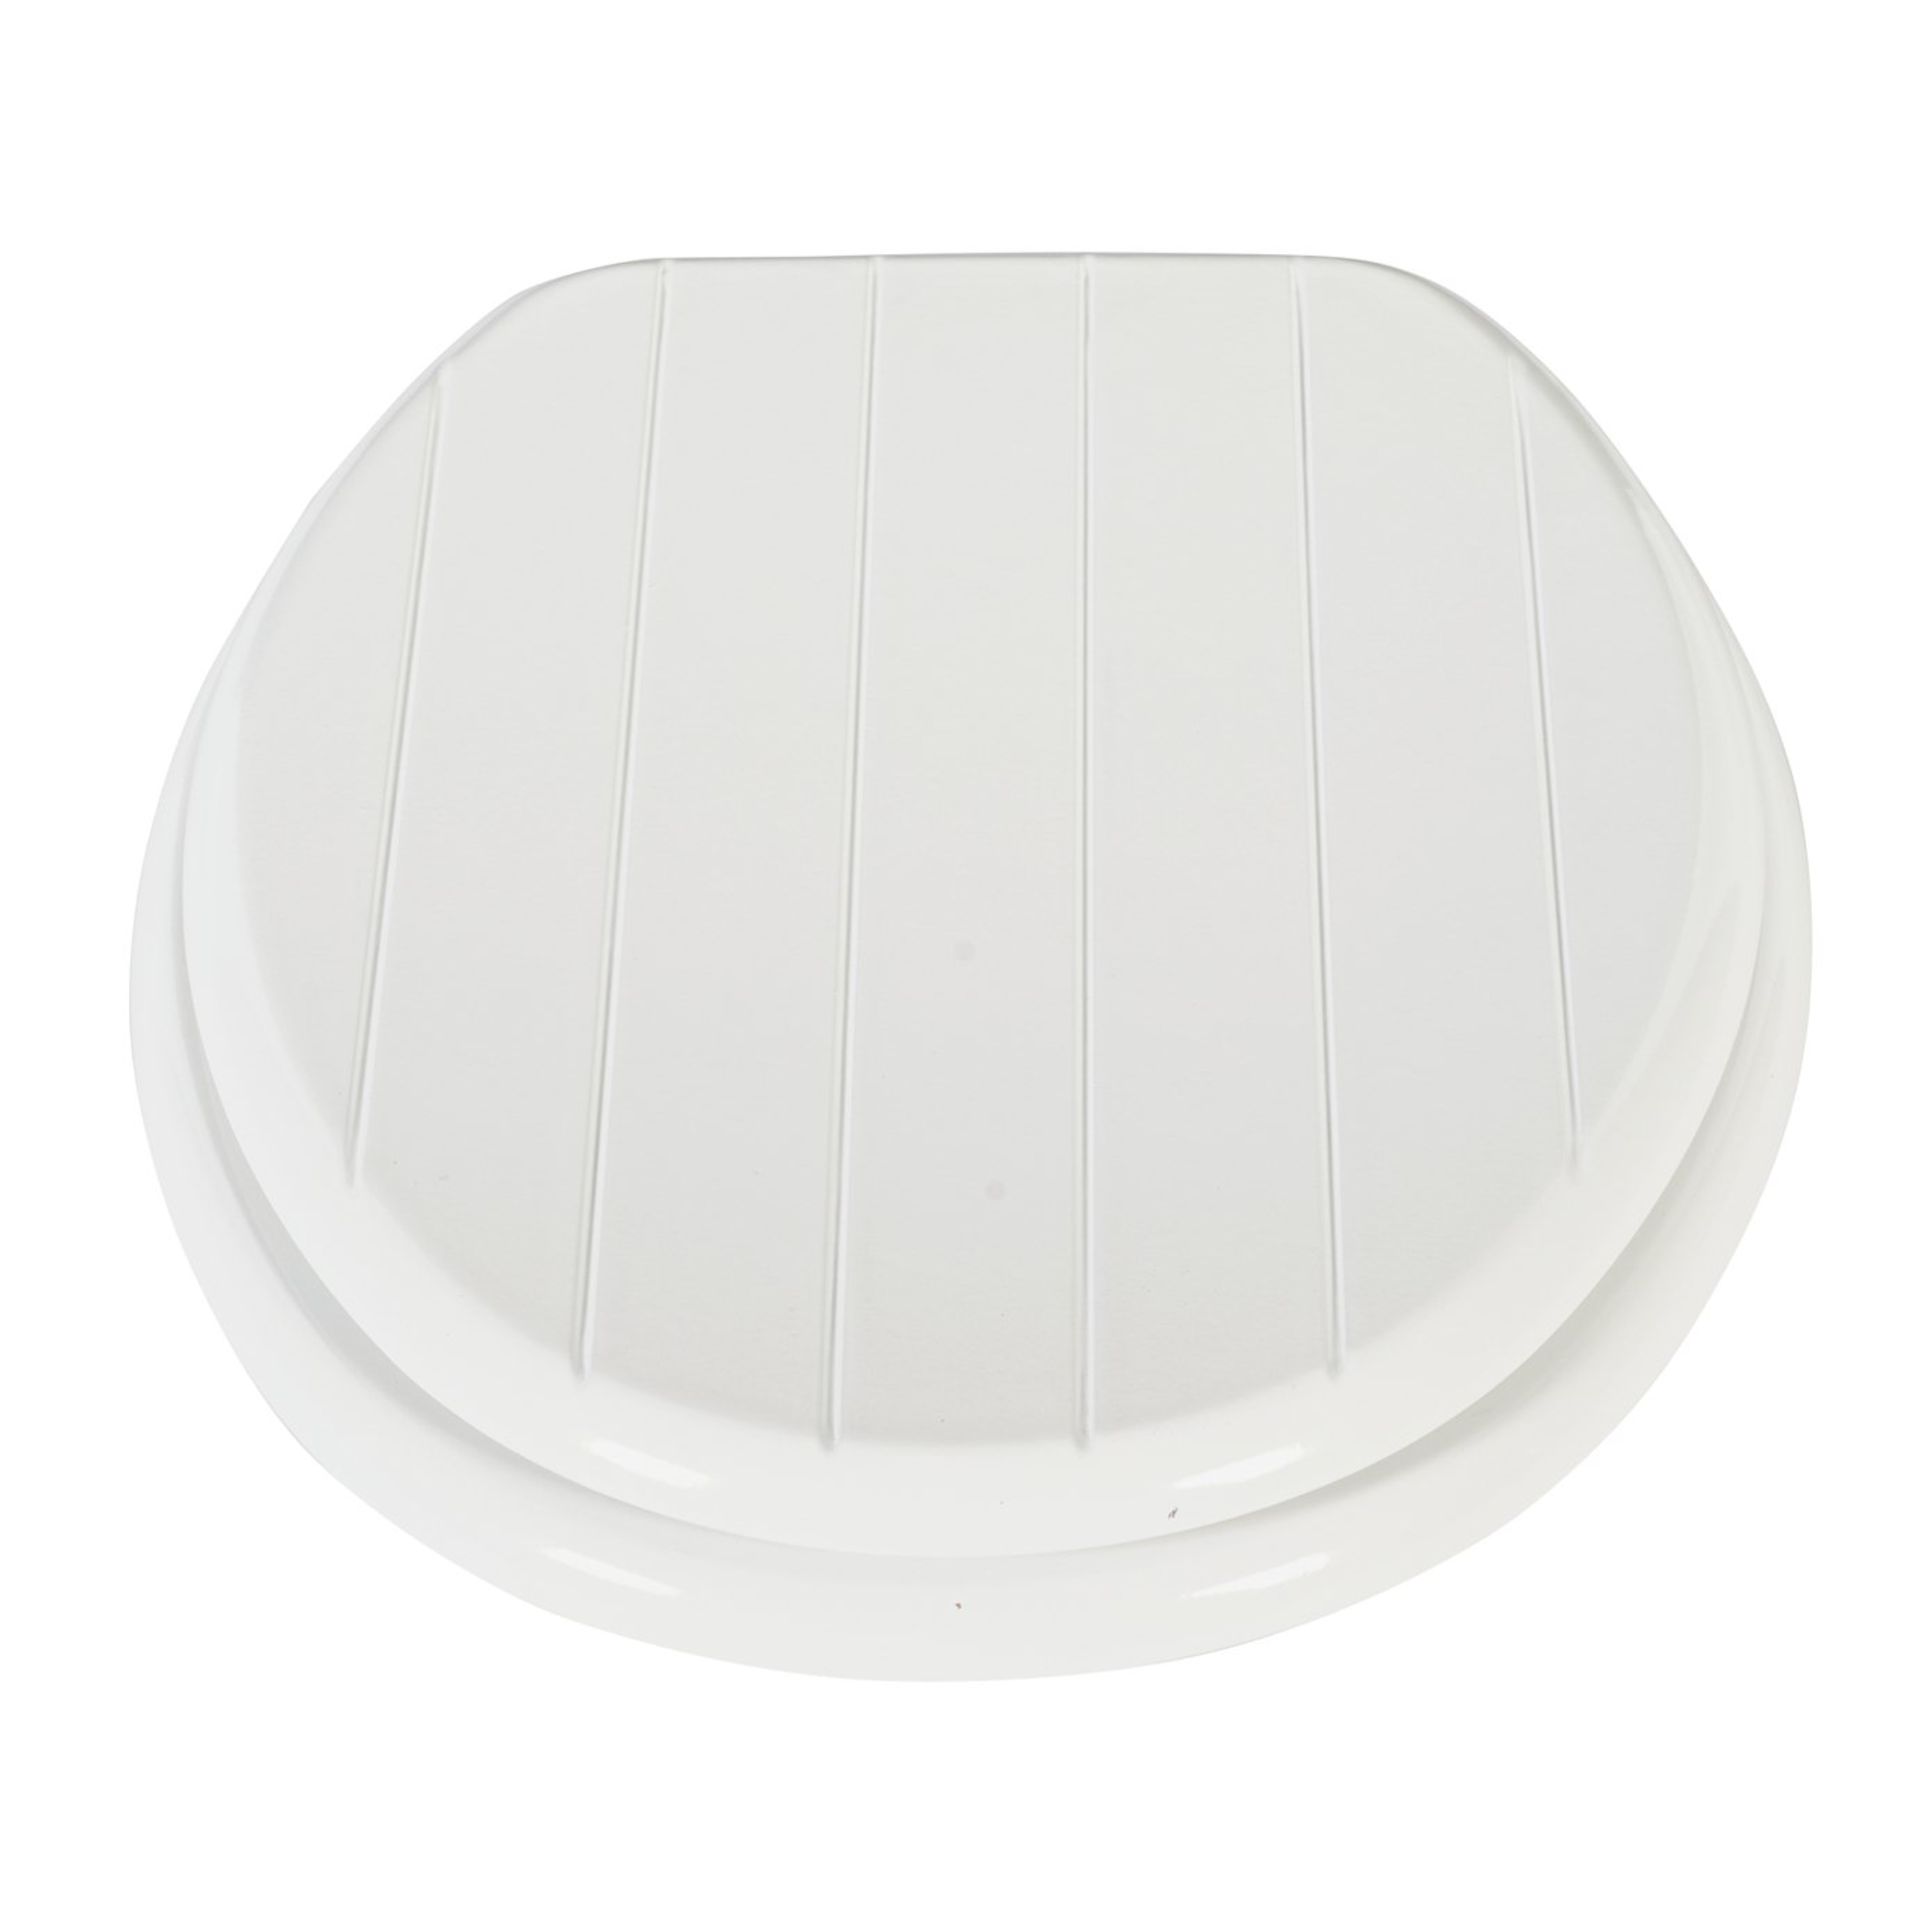 Home shaker style toilet seat (Delivery Band A)